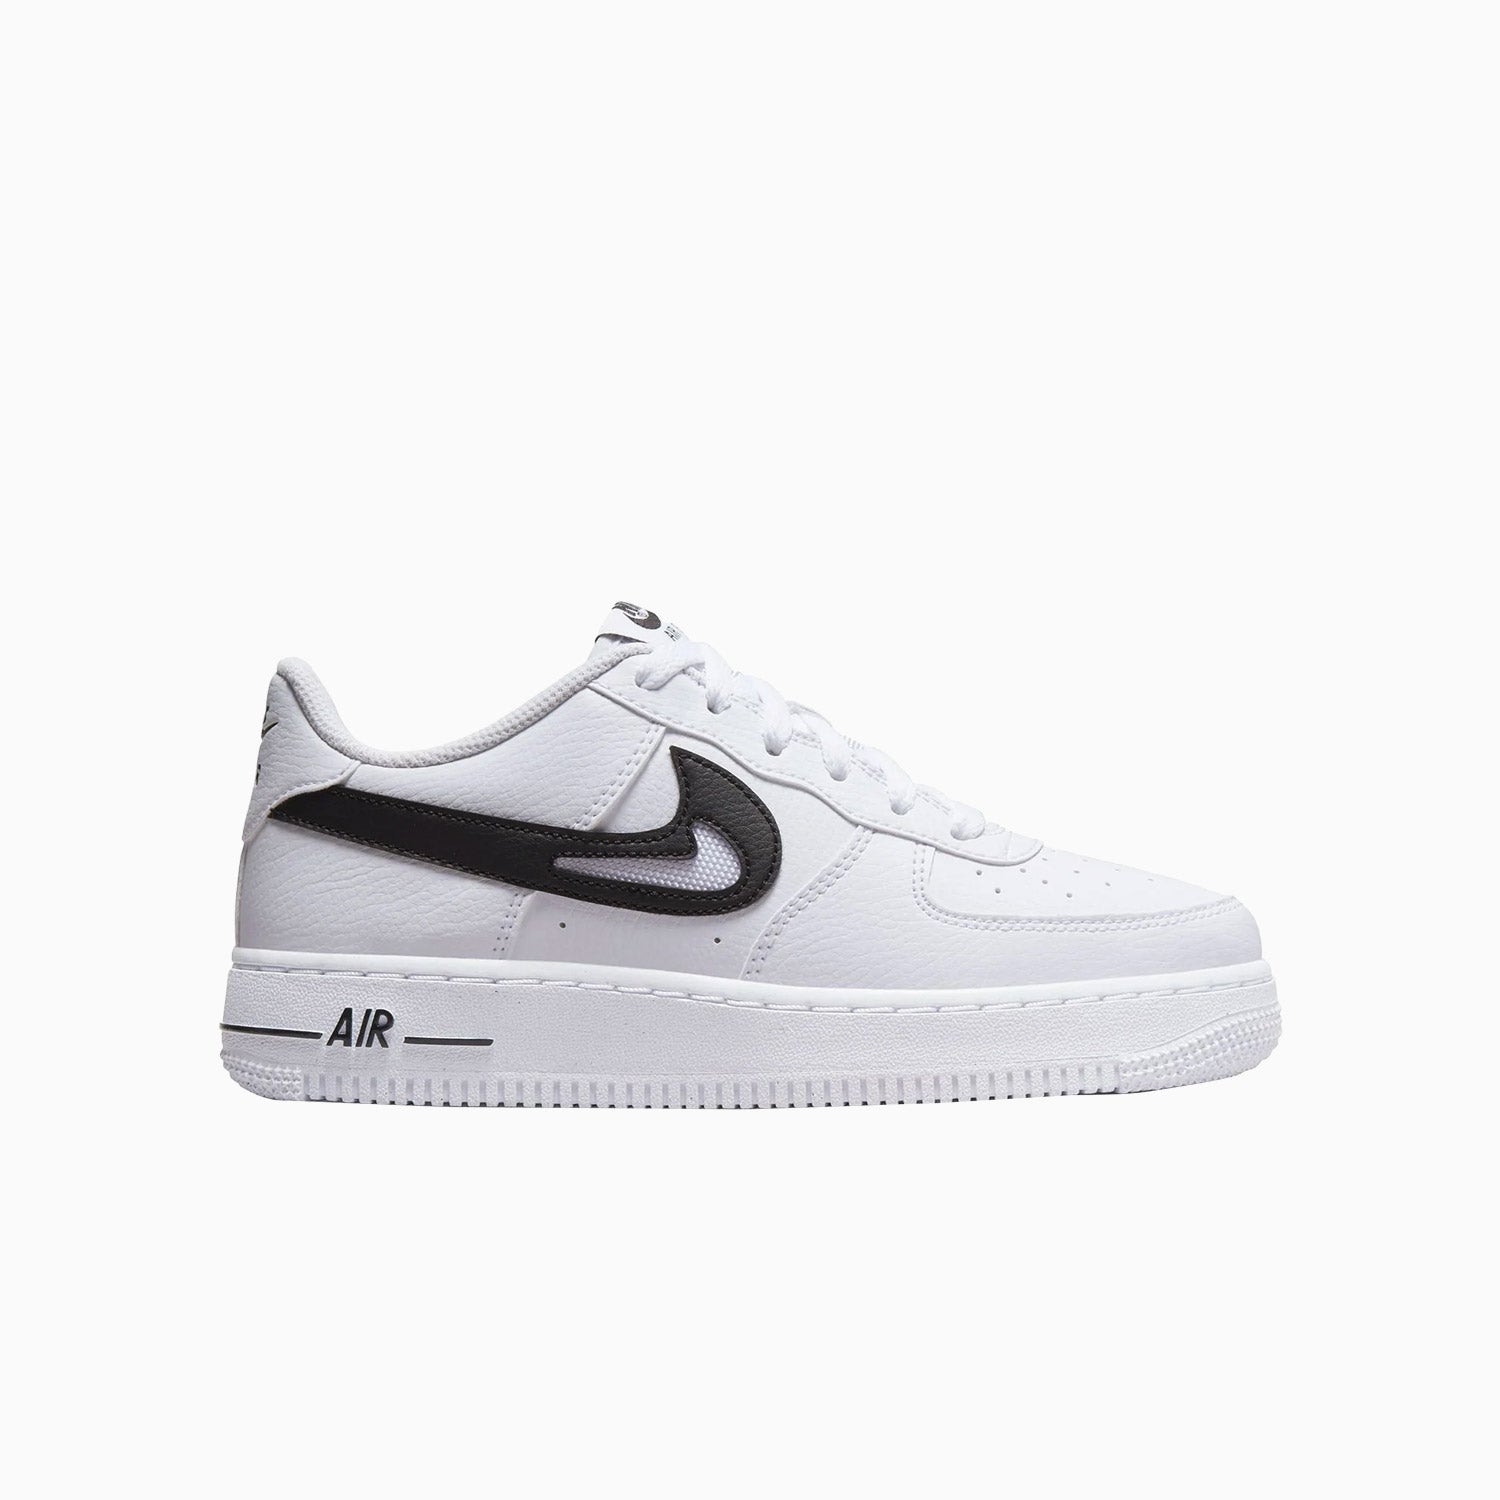 nike-kids-nike-air-force-1-low-cut-out-grade-school-dr7889-100